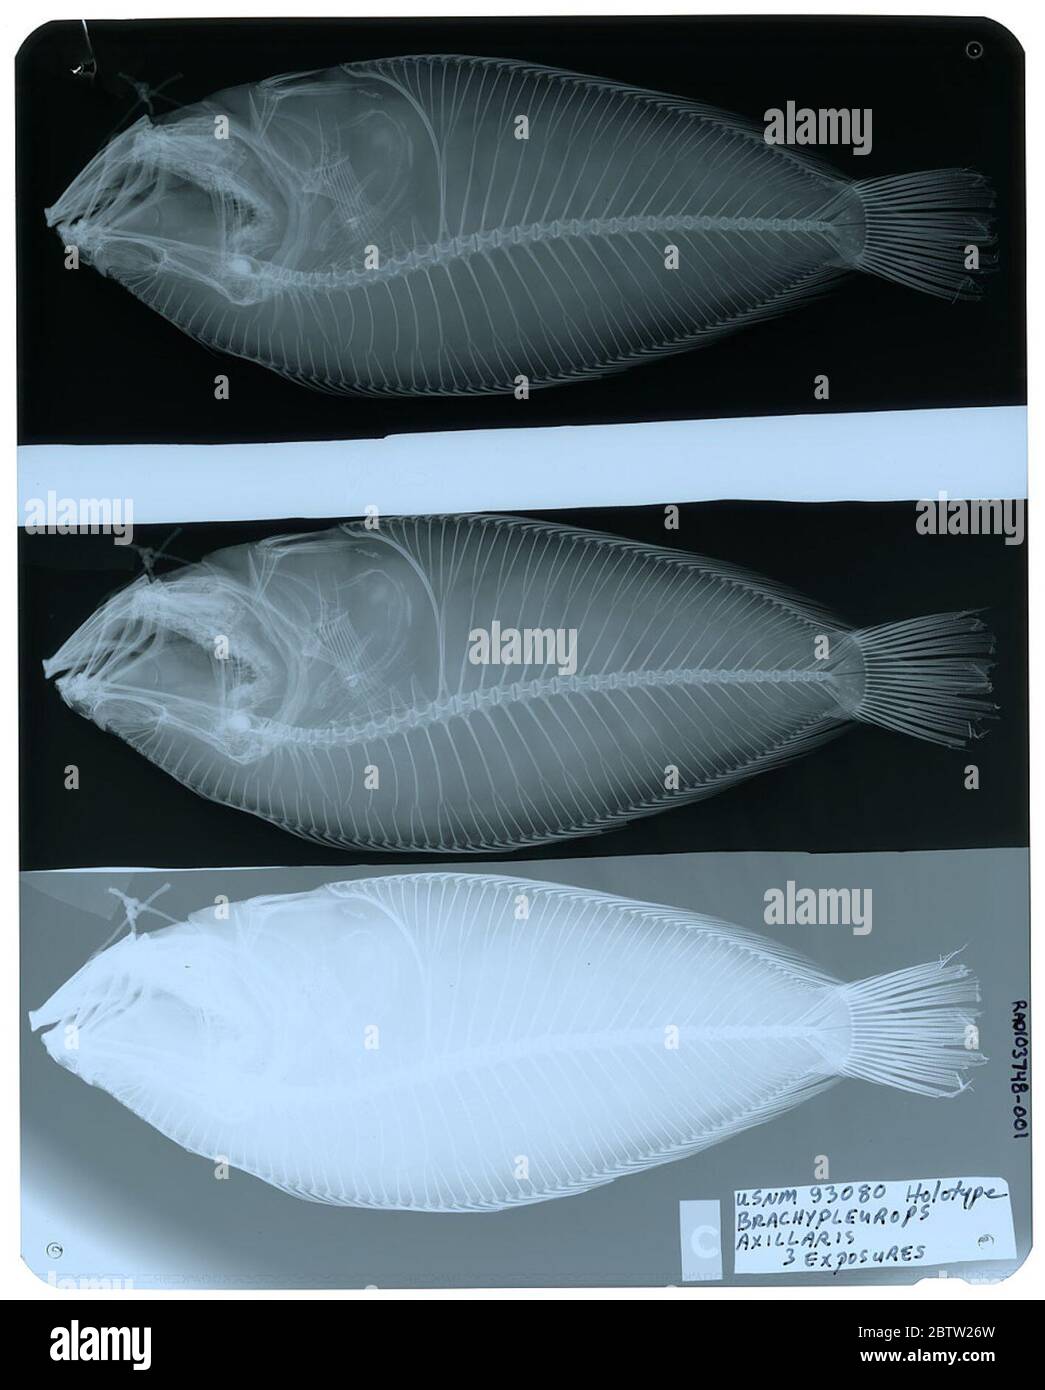 Brachypleurops axillaris Fowler. Radiograph is of a holotype; The Smithsonian NMNH Division of Fishes uses the convention of maintaining the original species name for type specimens designated at the time of description. The currently accepted name for this species is Citharoides macrolepidotus.25 Oct 2018D. Stock Photo